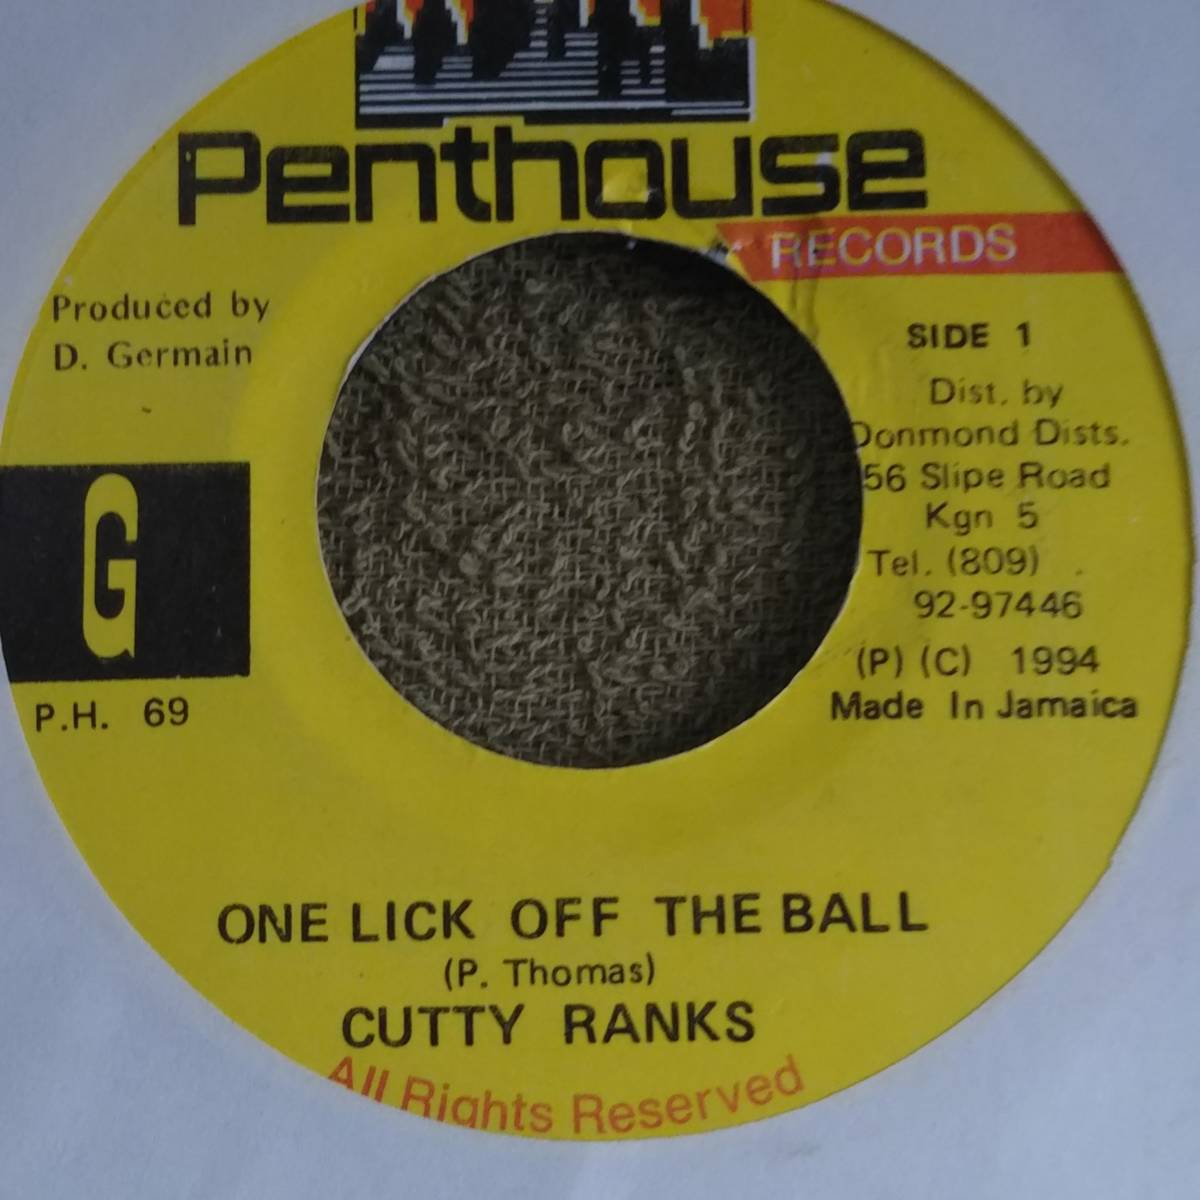 I'm Justa A Guy Riddim One Lick Off The Ball Cutty Ranks from Penthouse_画像1